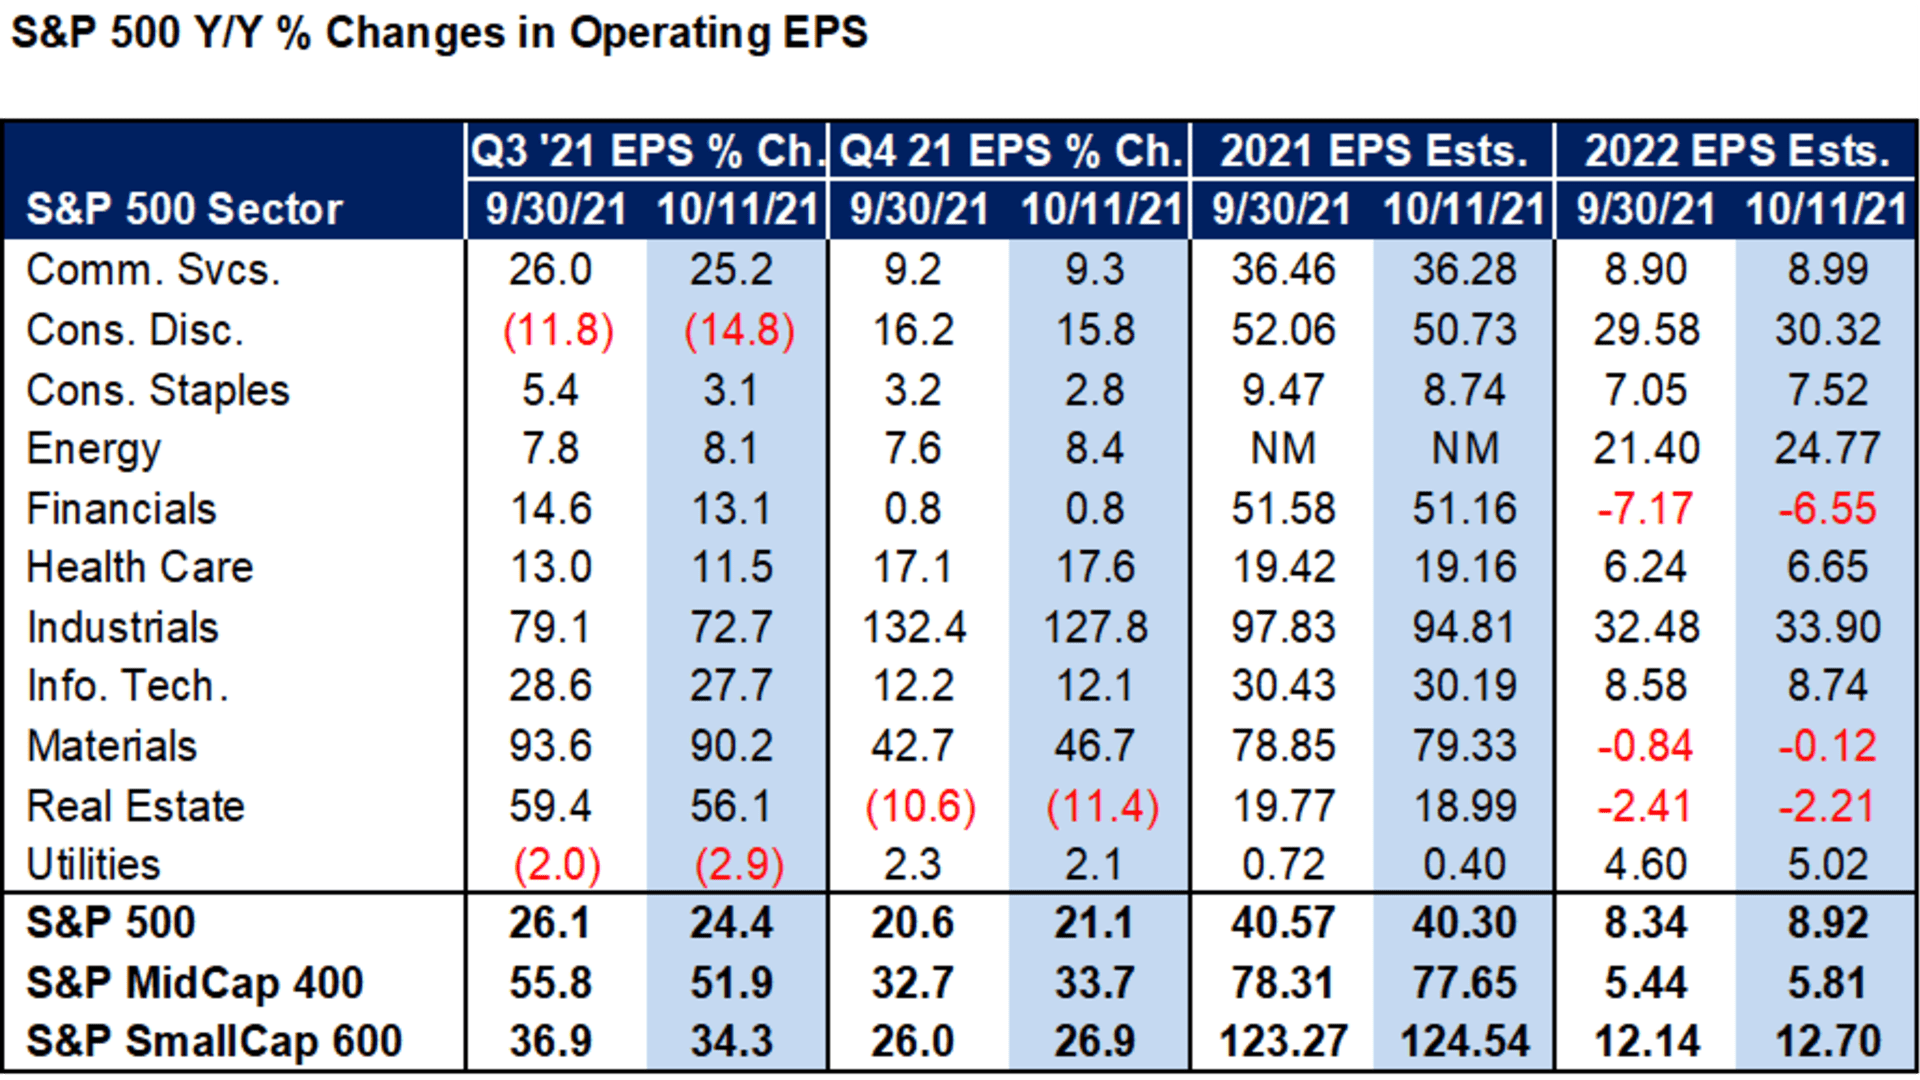 Typically, EPS estimates begin to outpace the end-of-quarter estimate this early in the reporting cycle, but not this time.